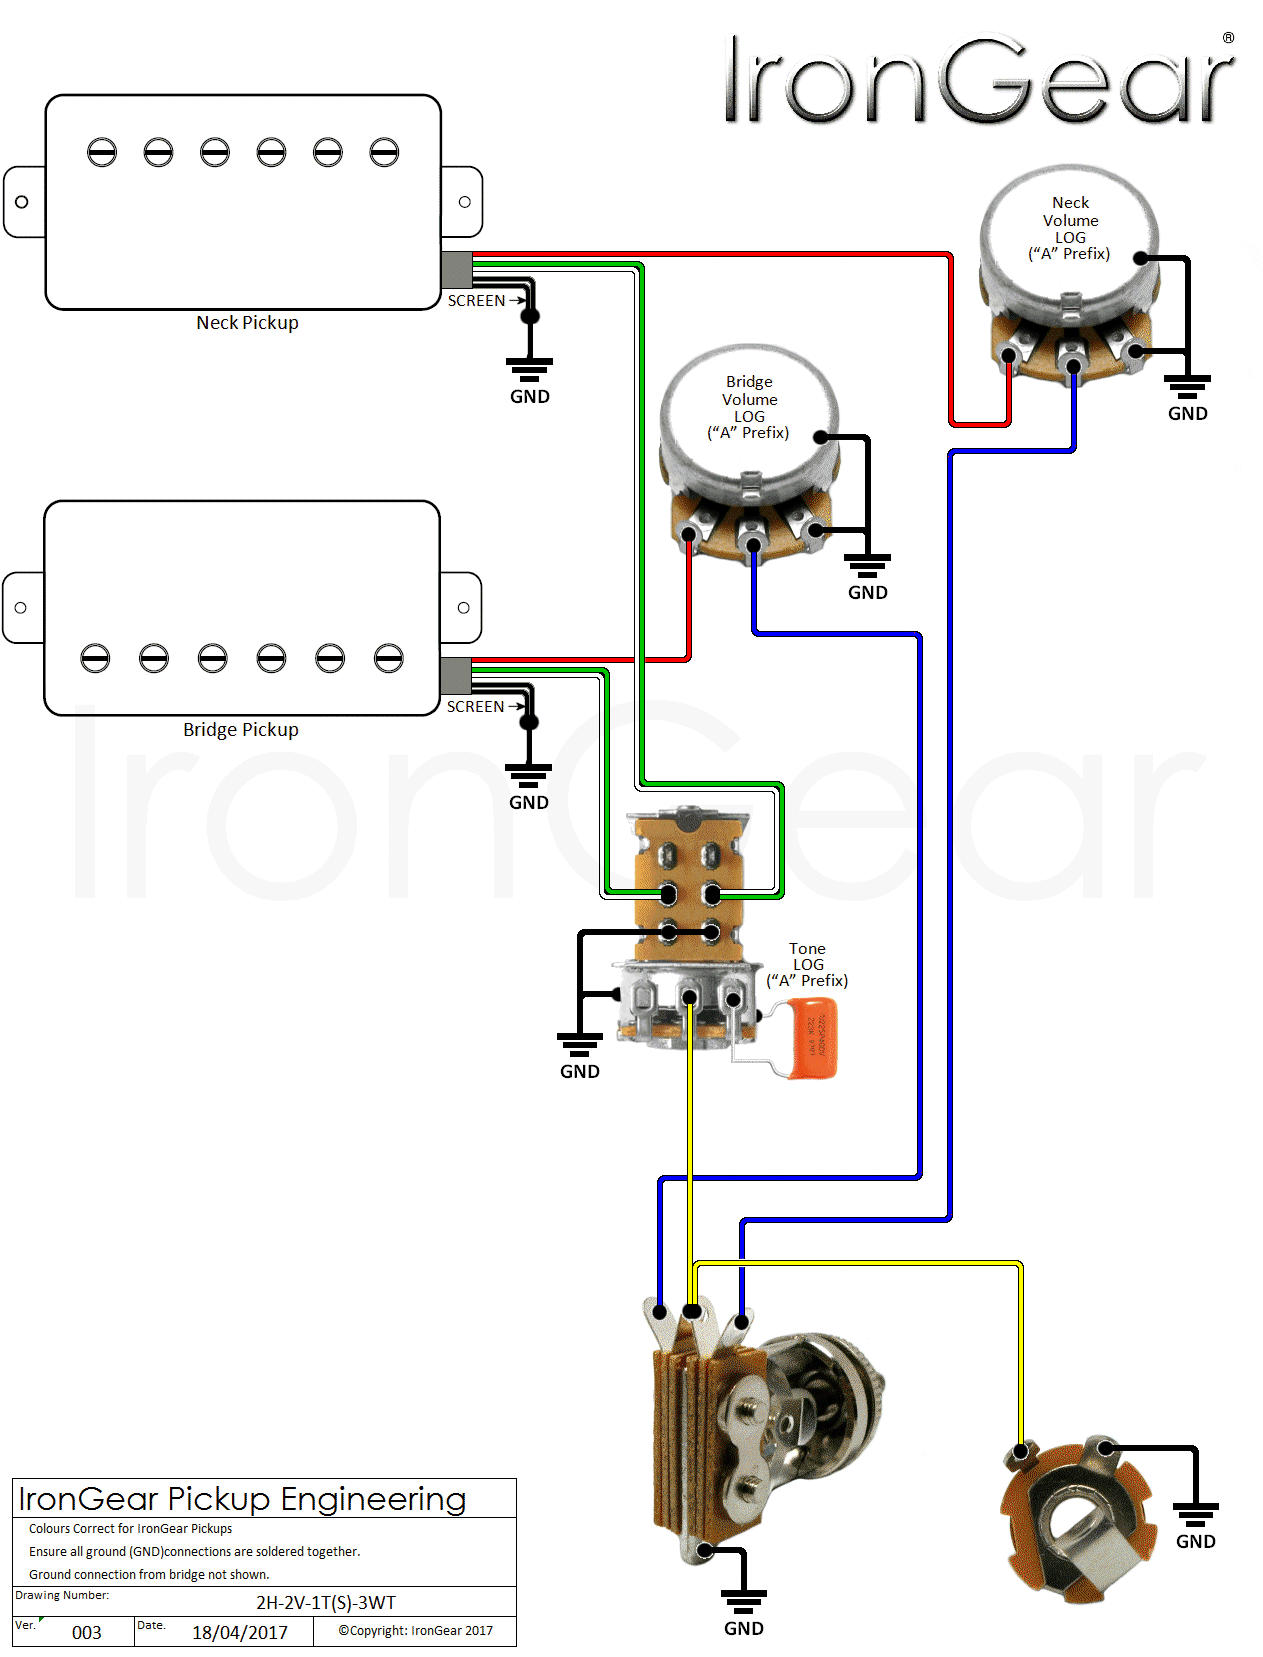 Wiring Diagram For 2 Humbucker Telecaster from www.irongear.co.uk